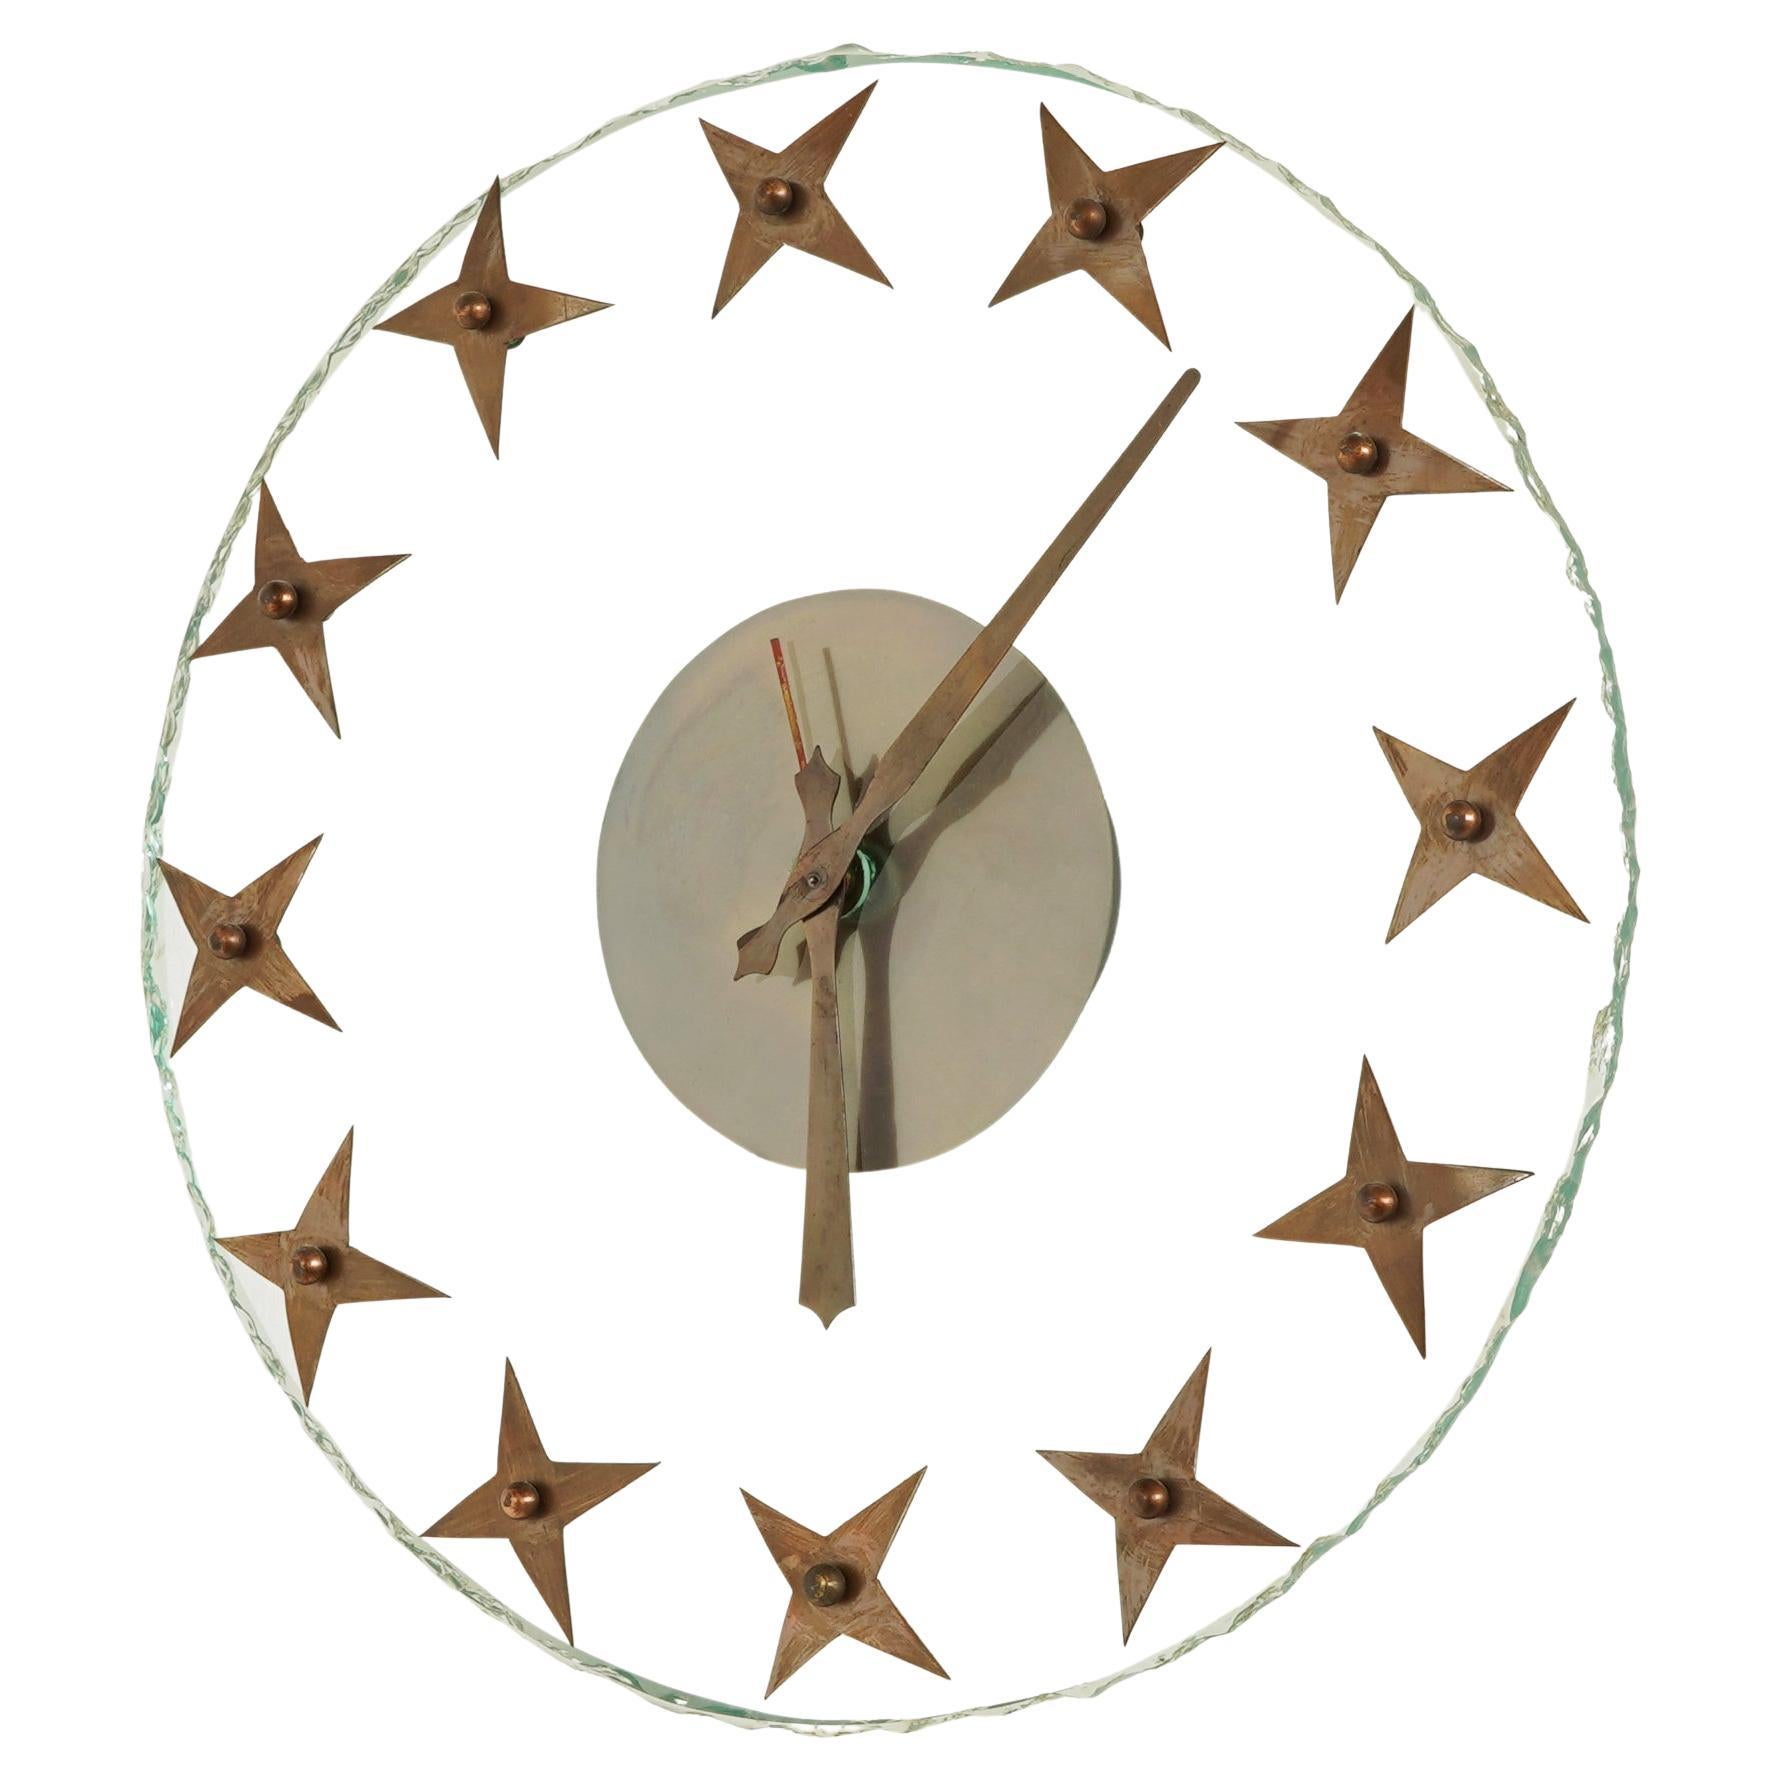 Art Deco Wall Clock in Rough Edged Glass with Brass Stars 1940s